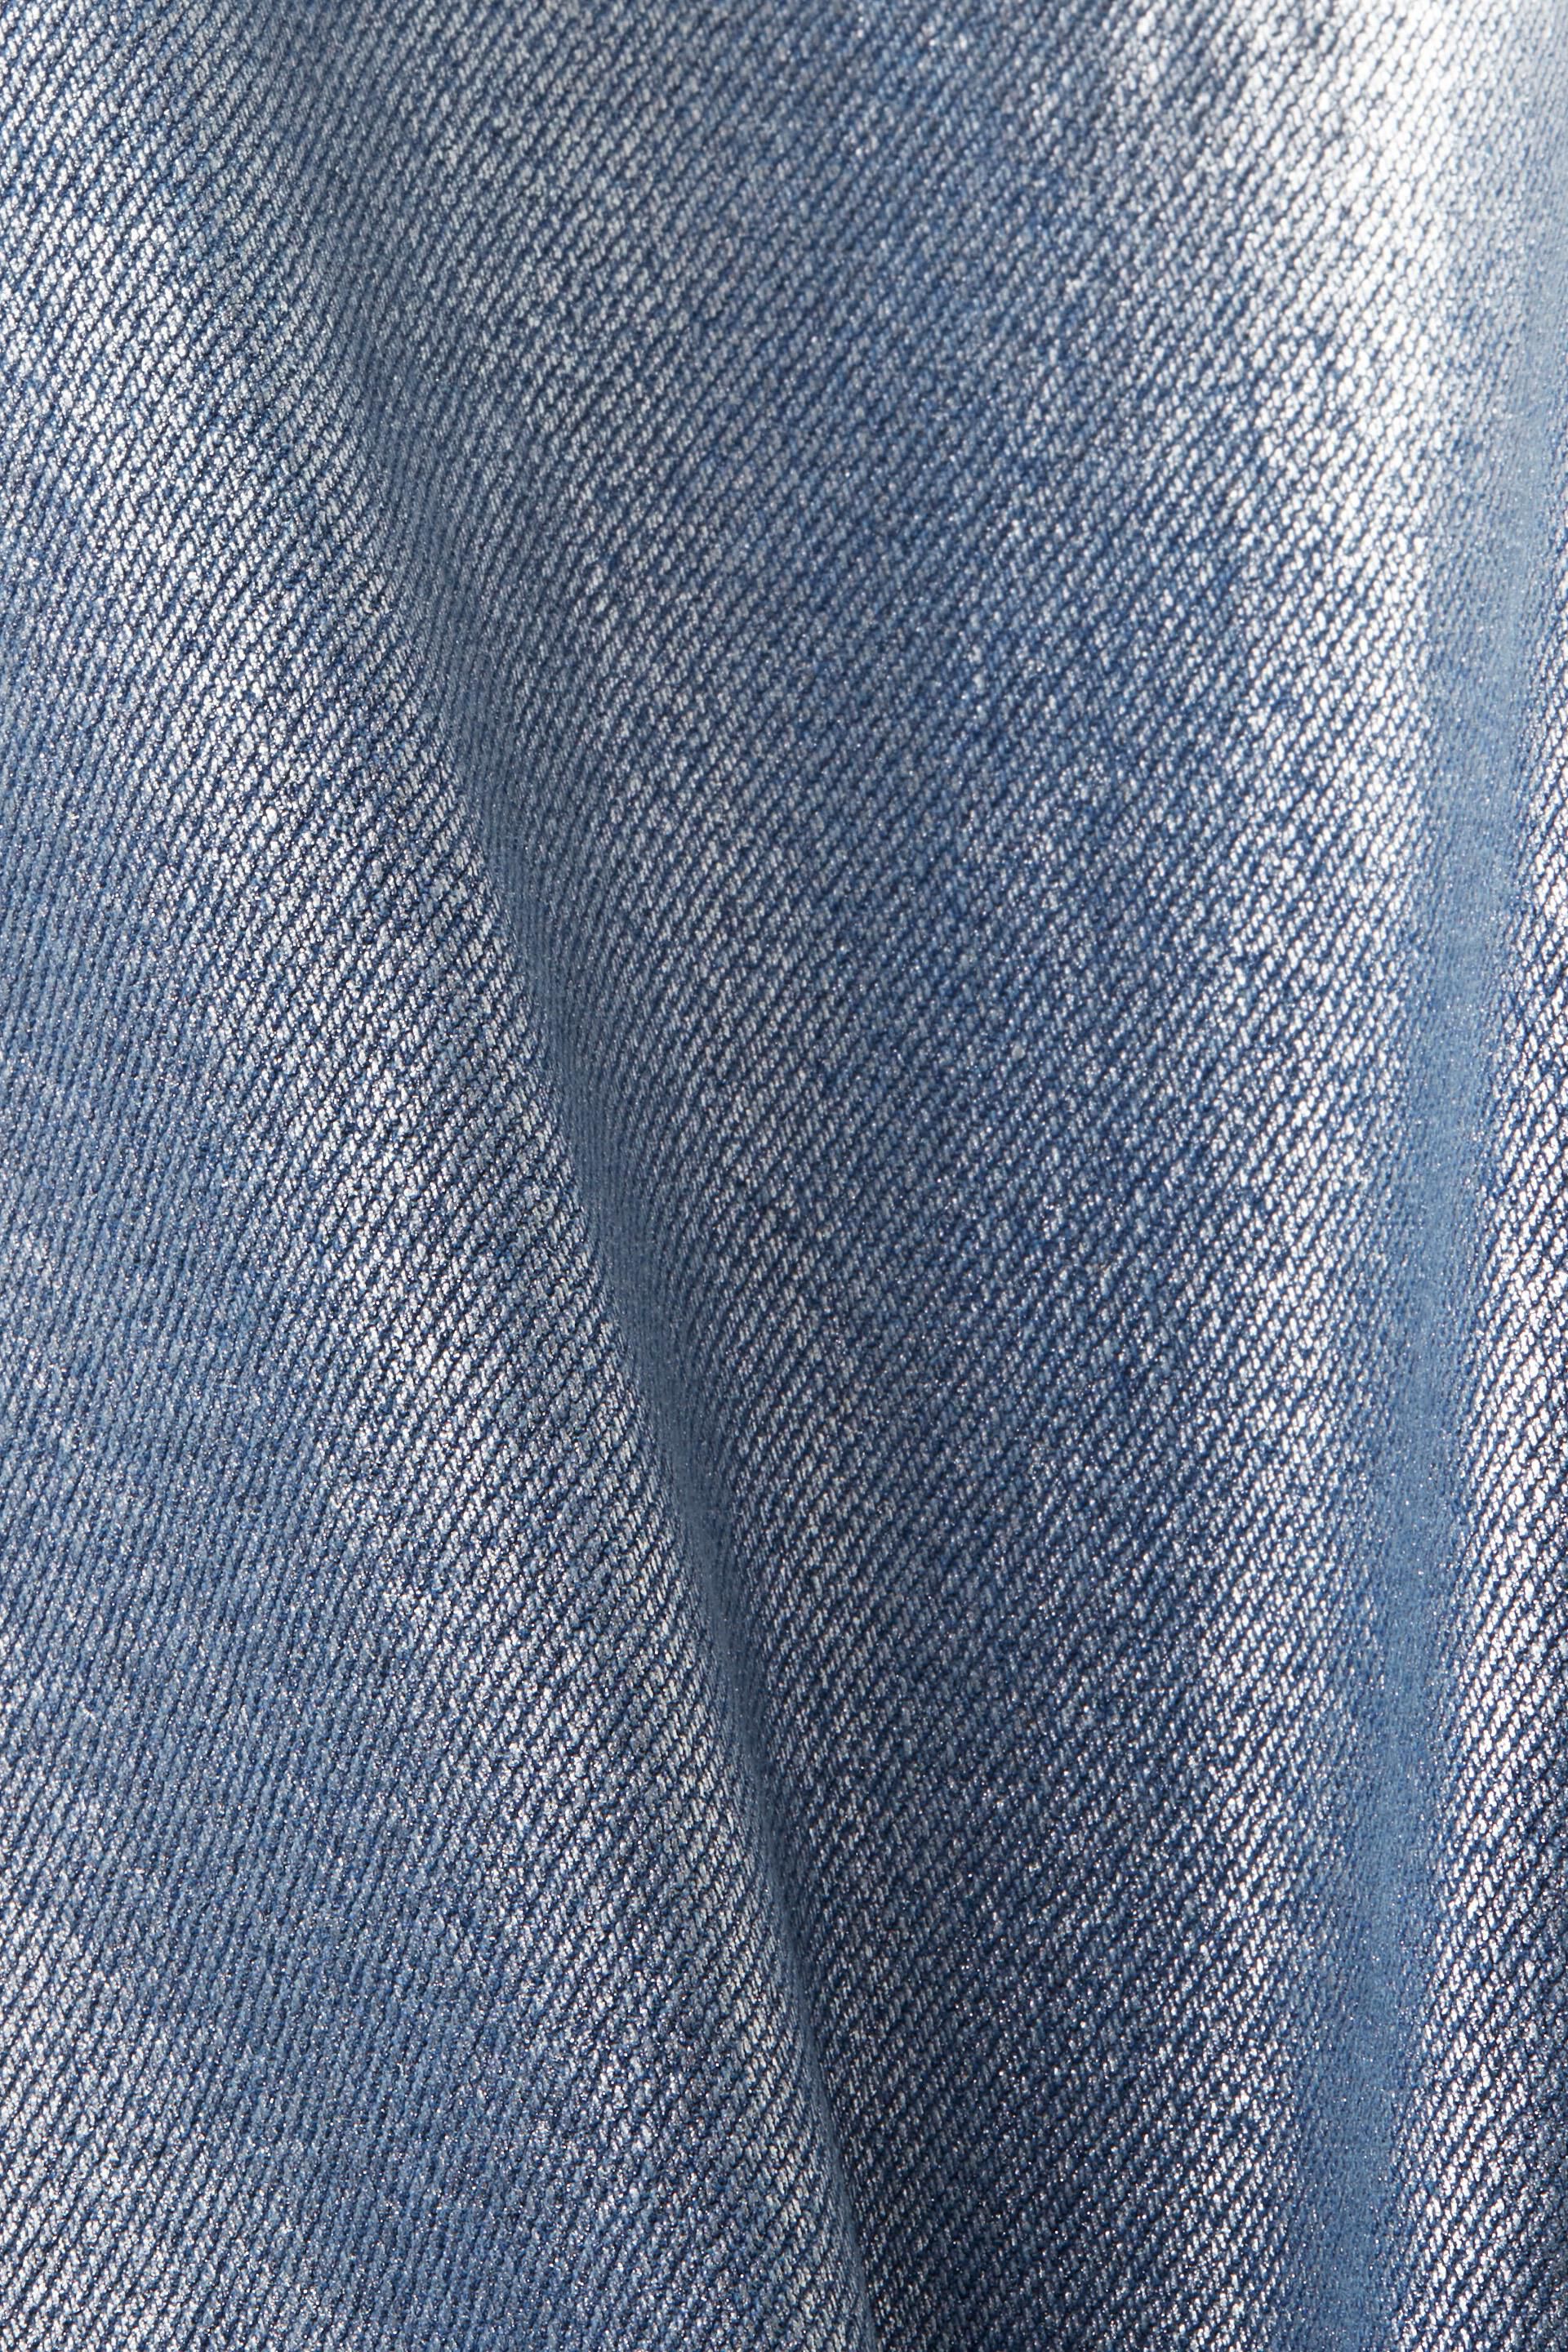 11oz Denim Fabric Enzyme Washed Jeans Cotton Material - 168cm wide | eBay